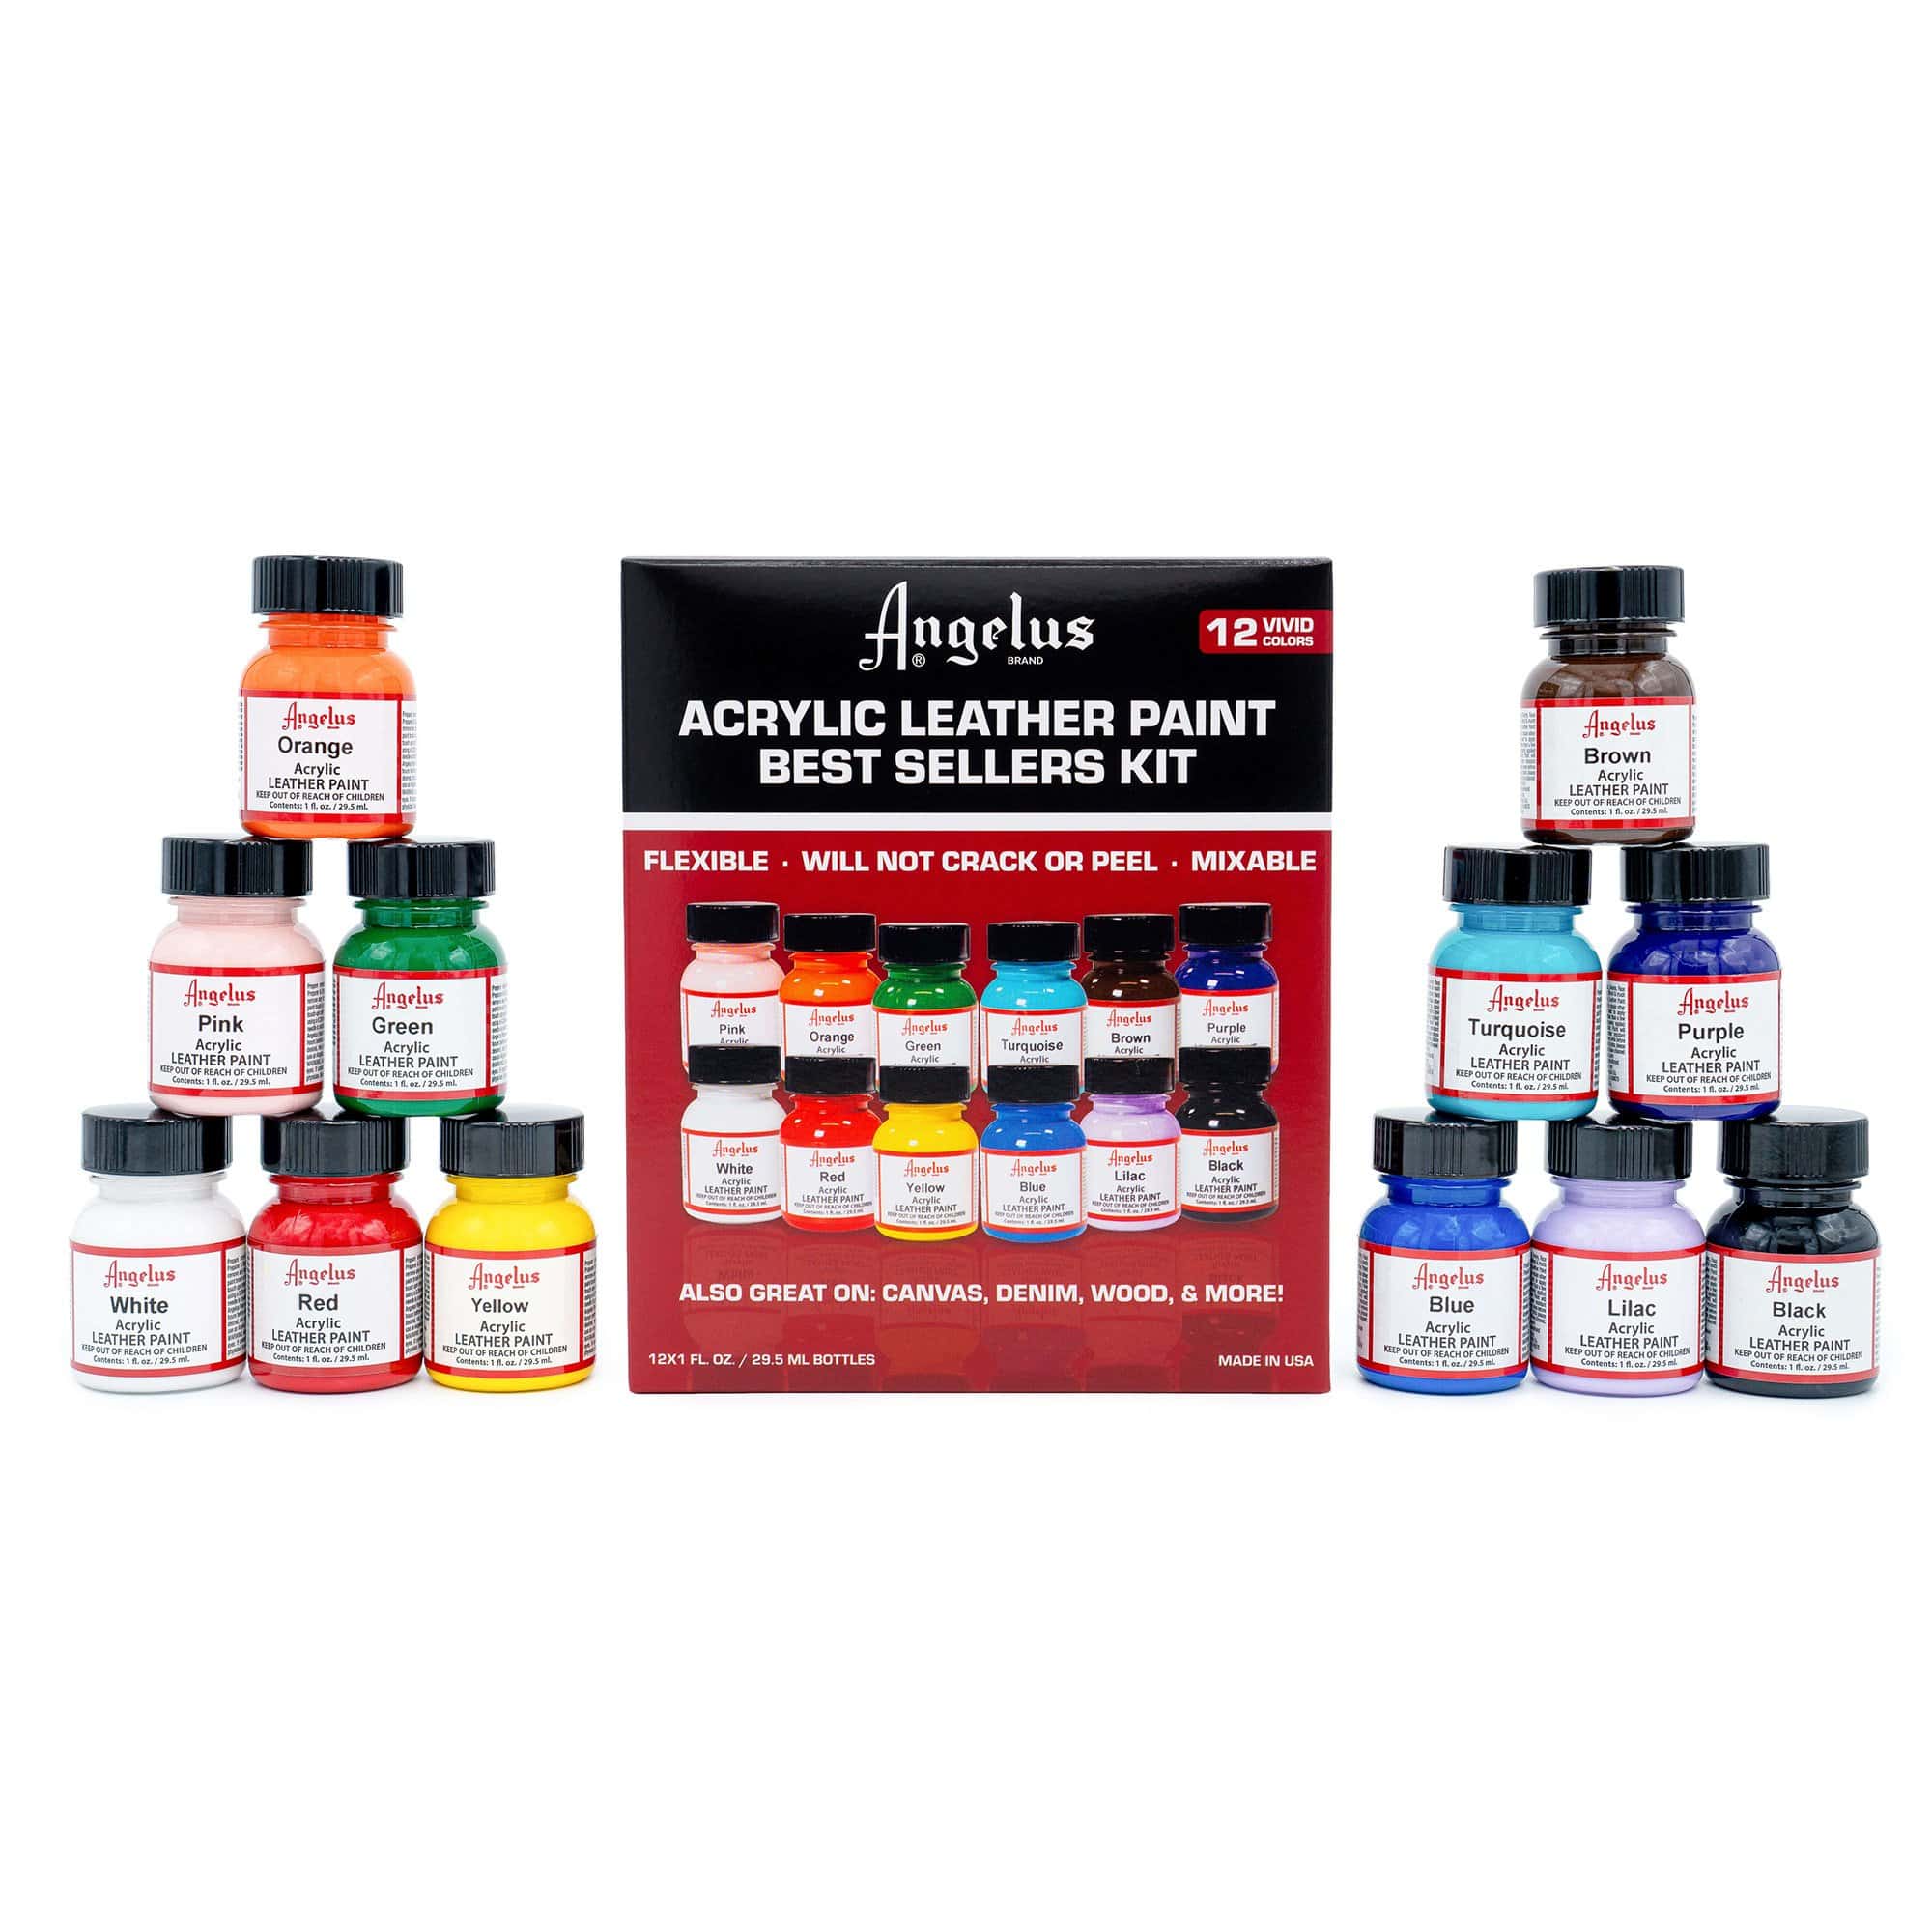 Allards Art - Create your own custom designs with Angelus Shoe Polish  Leather Paint—bright, vibrant acrylic paints designed specifically for use  on leather. Whether you're sprucing up an old pair of shoes